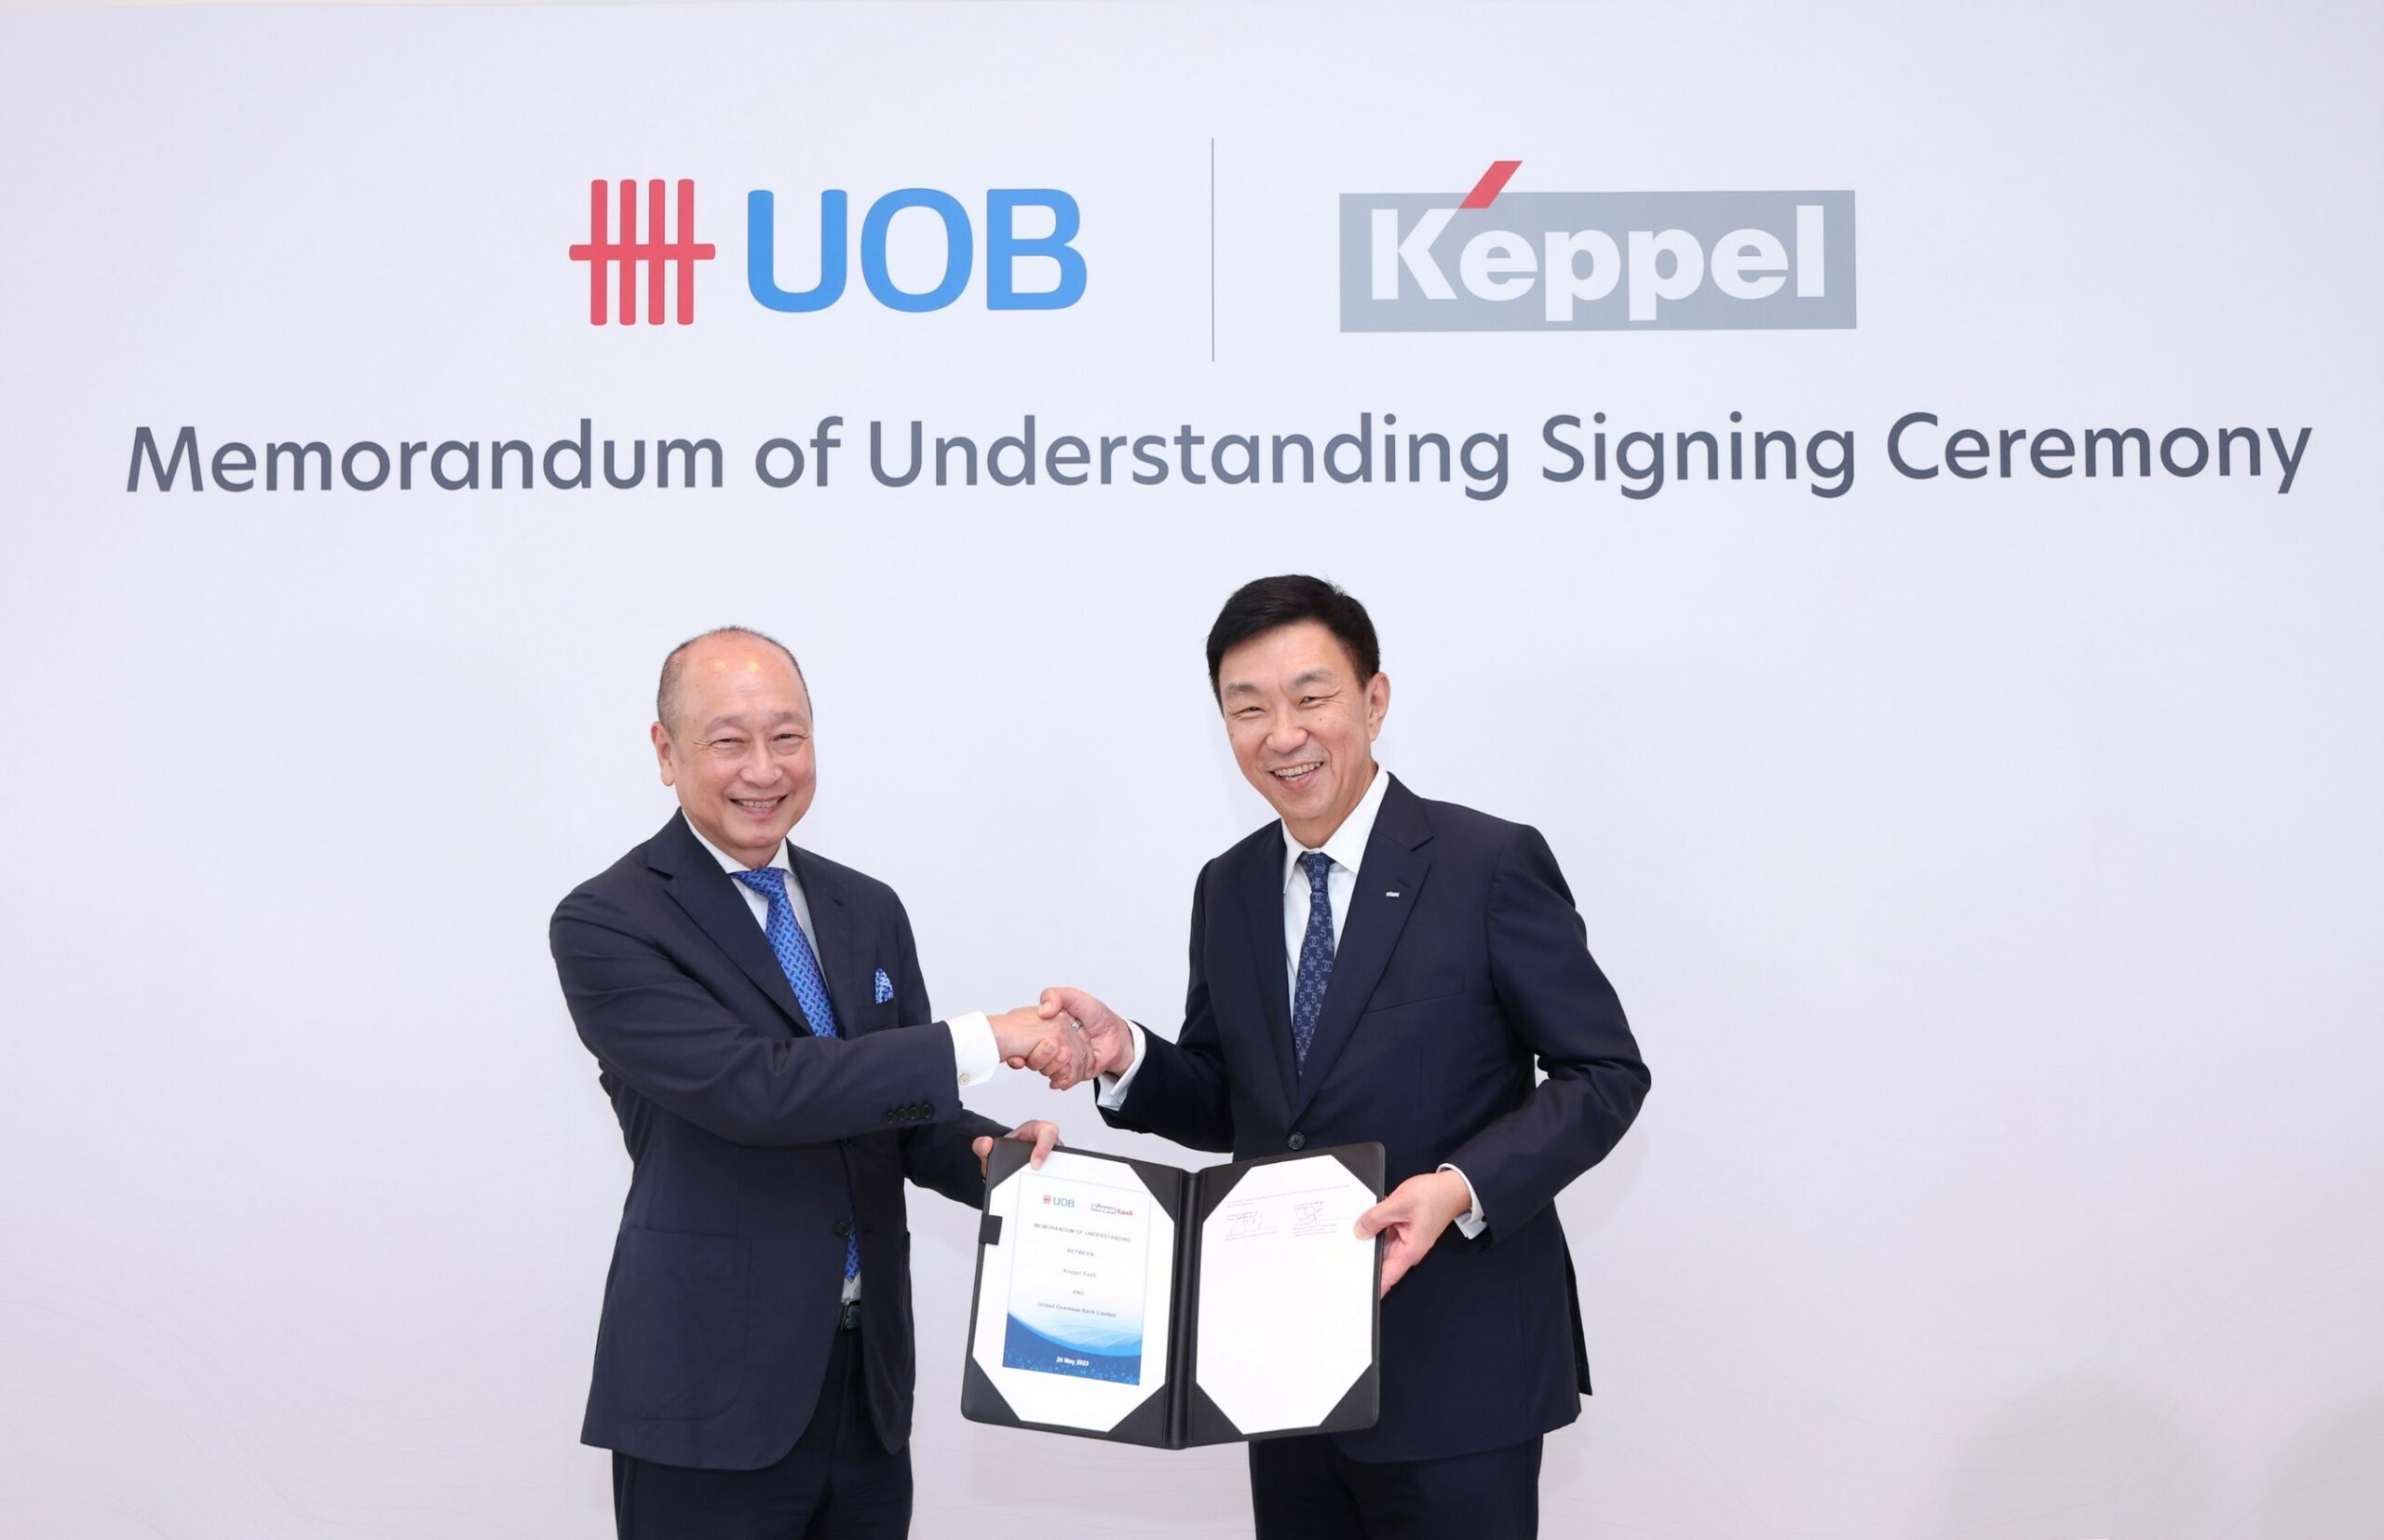  UOB and Keppel join hands to work on decarbonisation